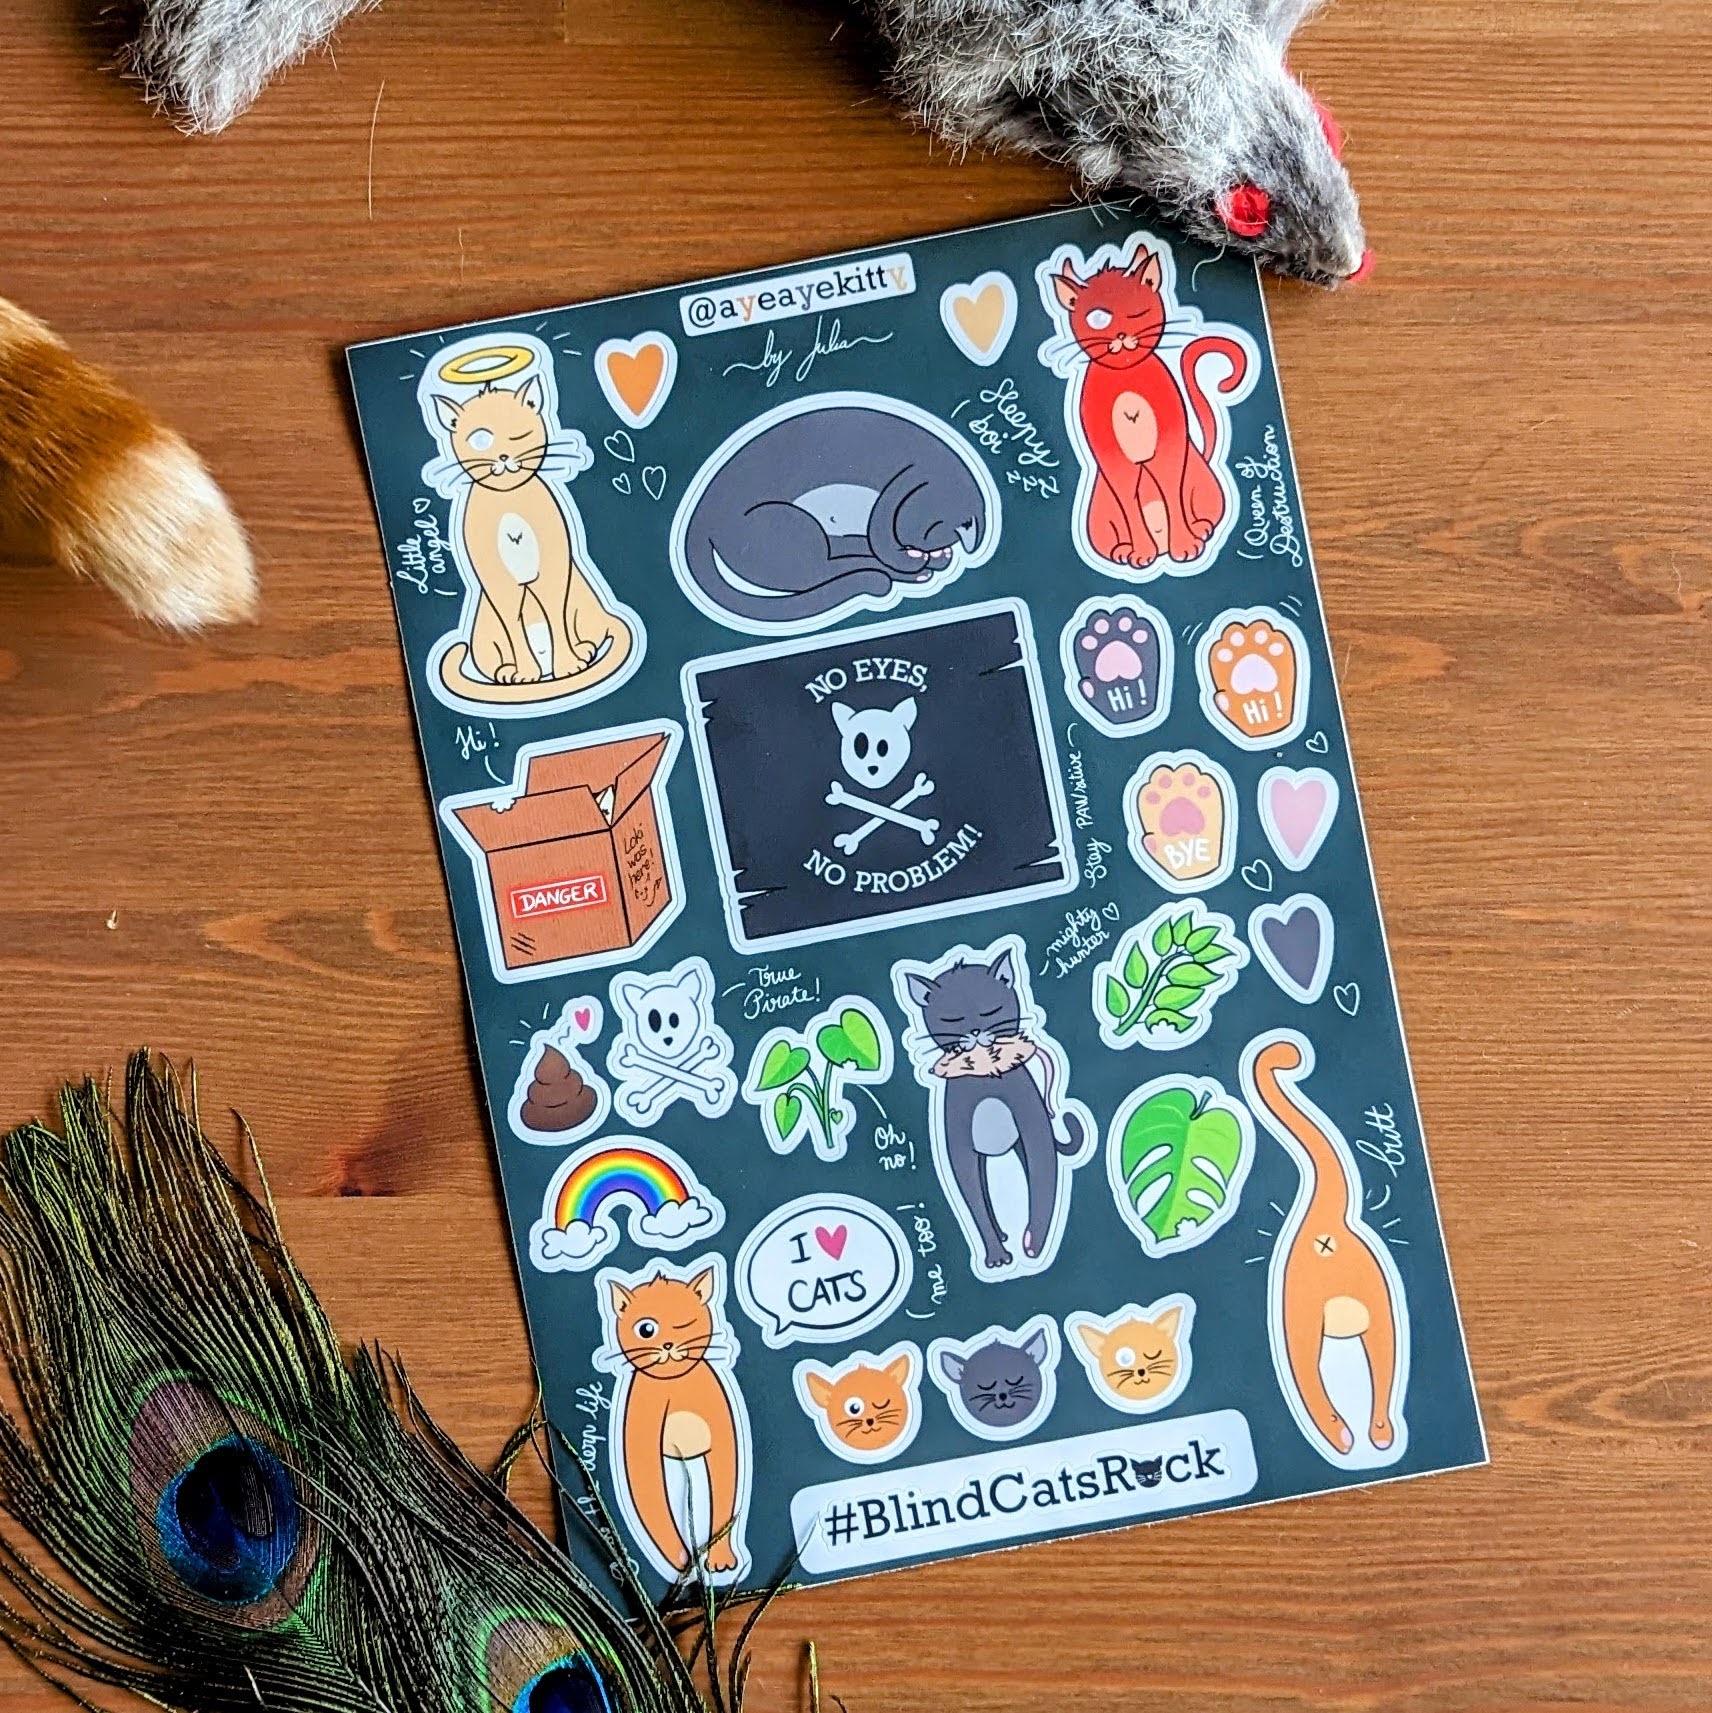 a sheet of stickers in a doodle style, including the three cats, some half eaten plants, and damages card box, some paws, some hearts, a pirate flag, a poop, and a rainbow